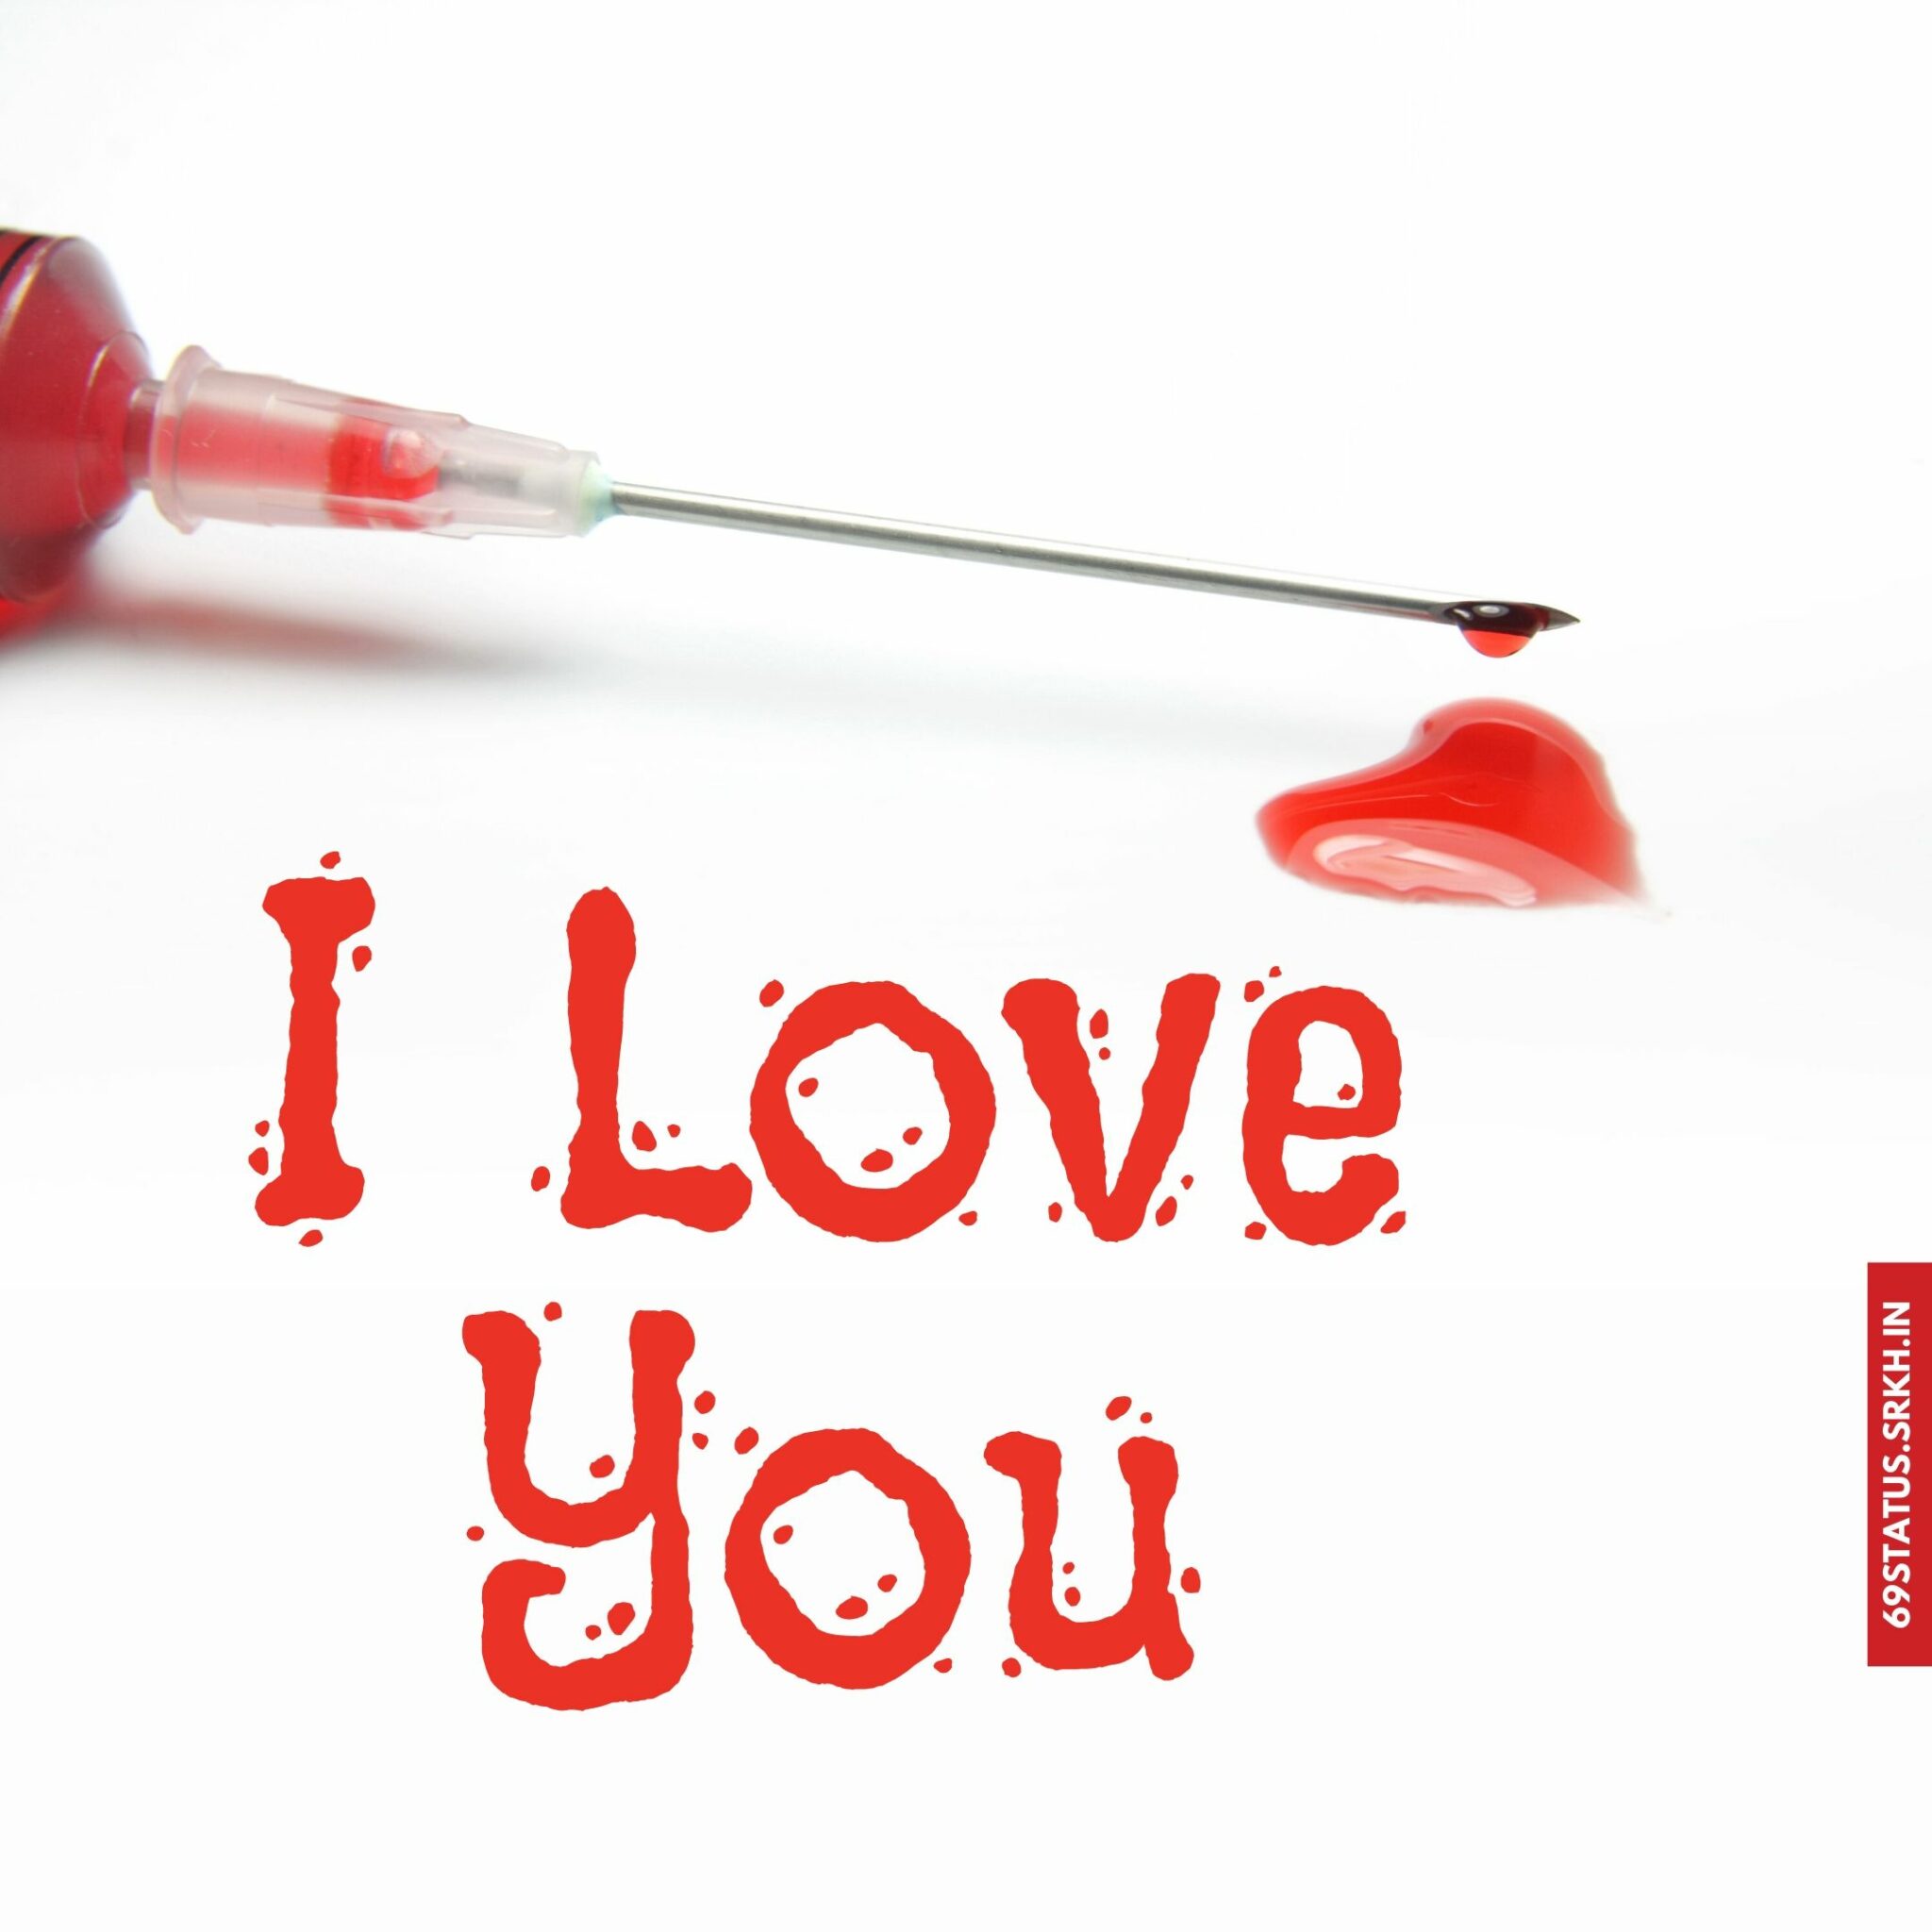 I Love You blood images hd